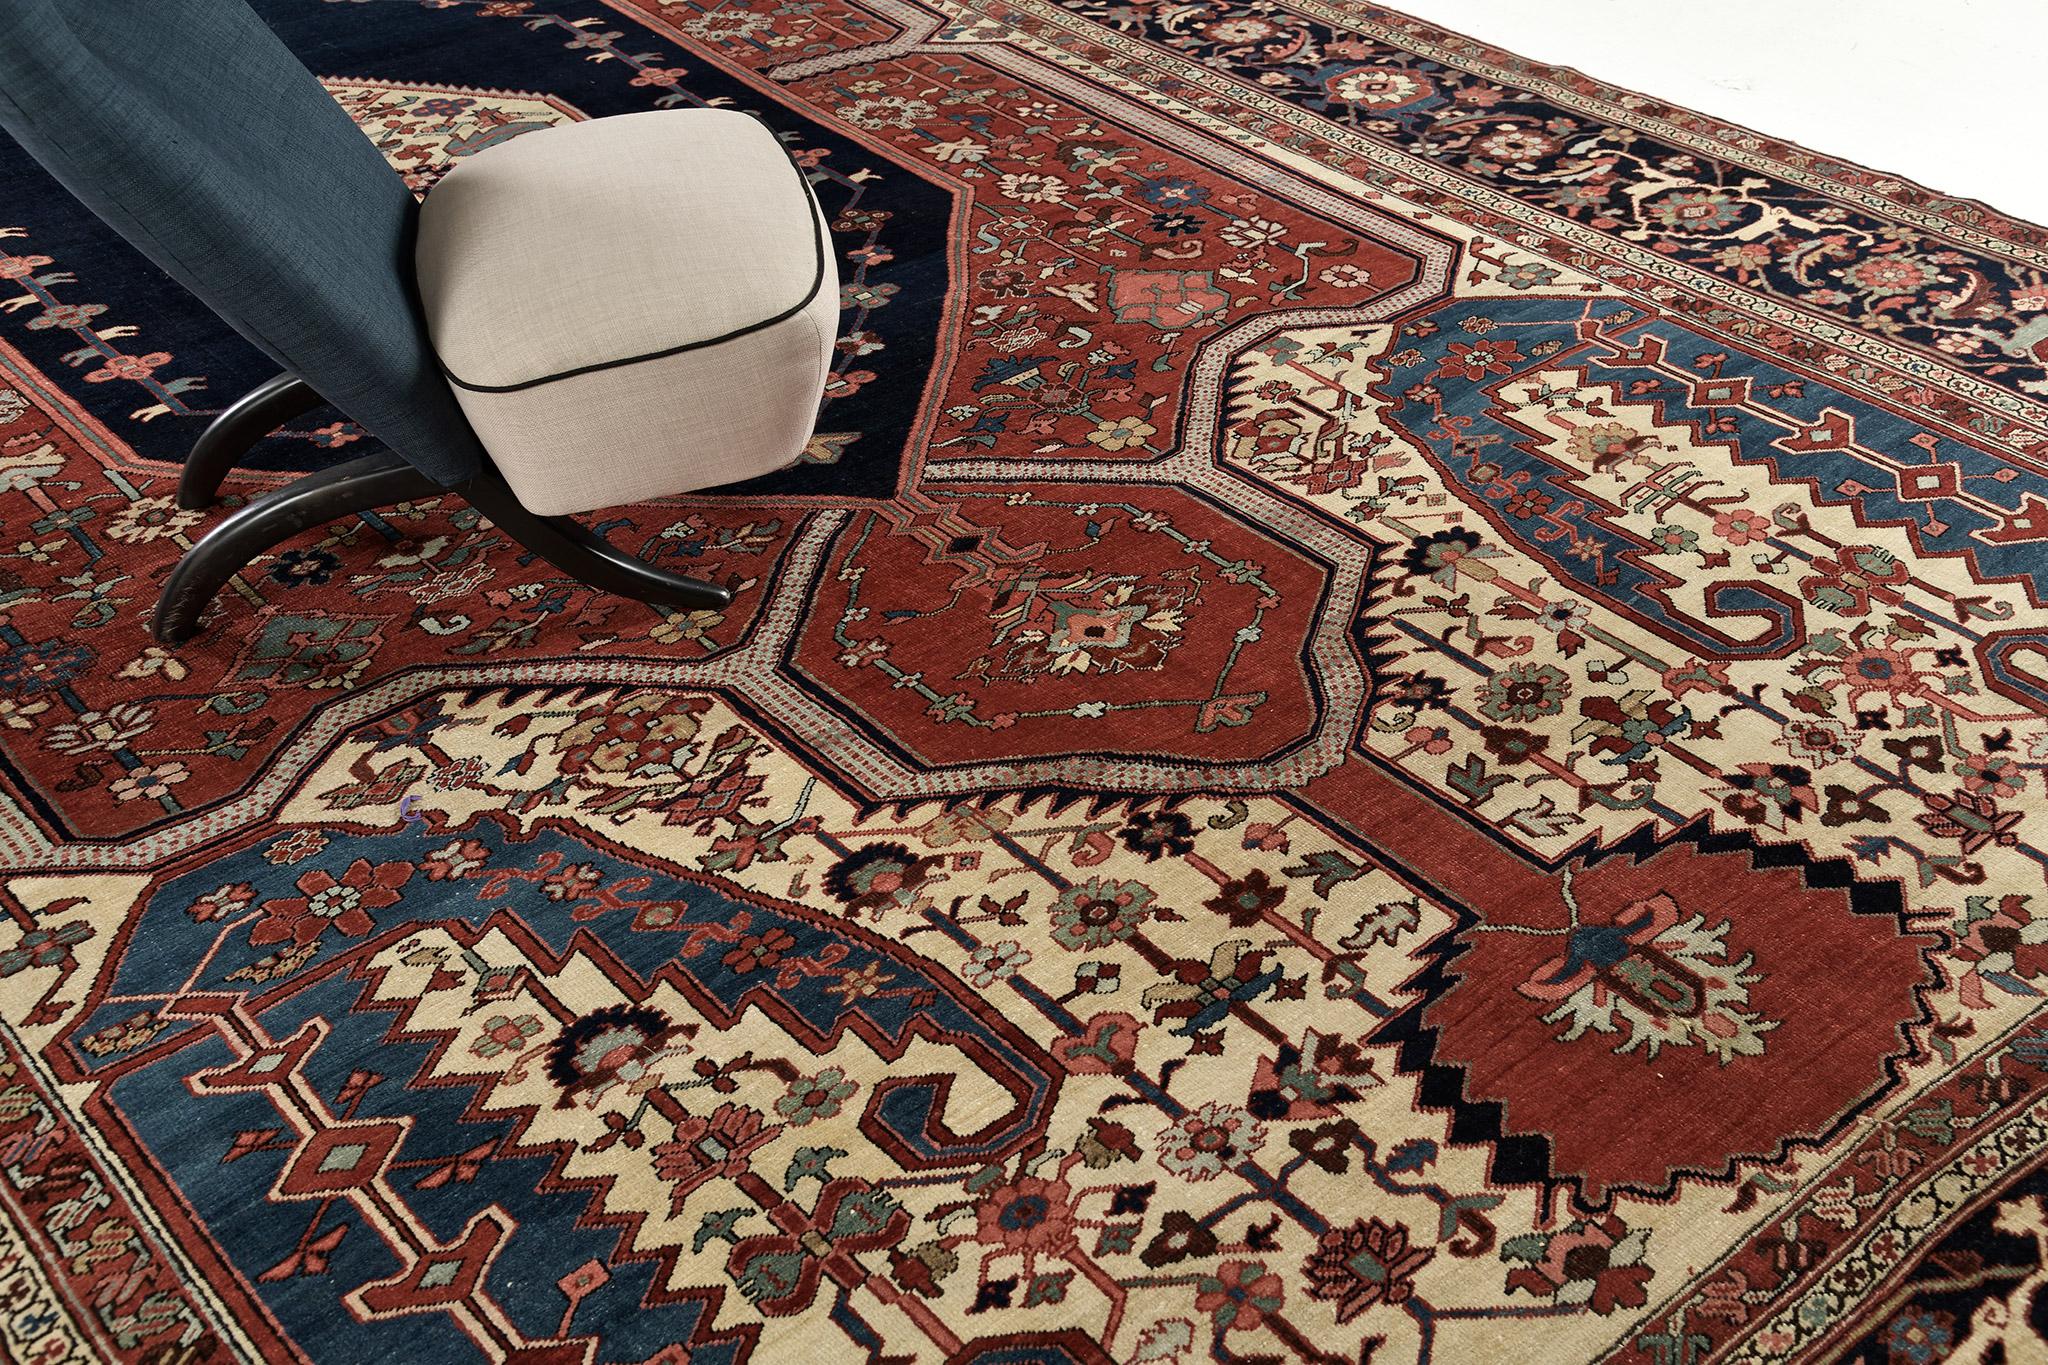 Our stunning Serapi rug features beautiful hues that are accented by a midnight blue central medallion. Majestically ensembled leafy scrolls, blooming florets, and motifs are well-coordinated with the brick red and night blue color schemes. A decor